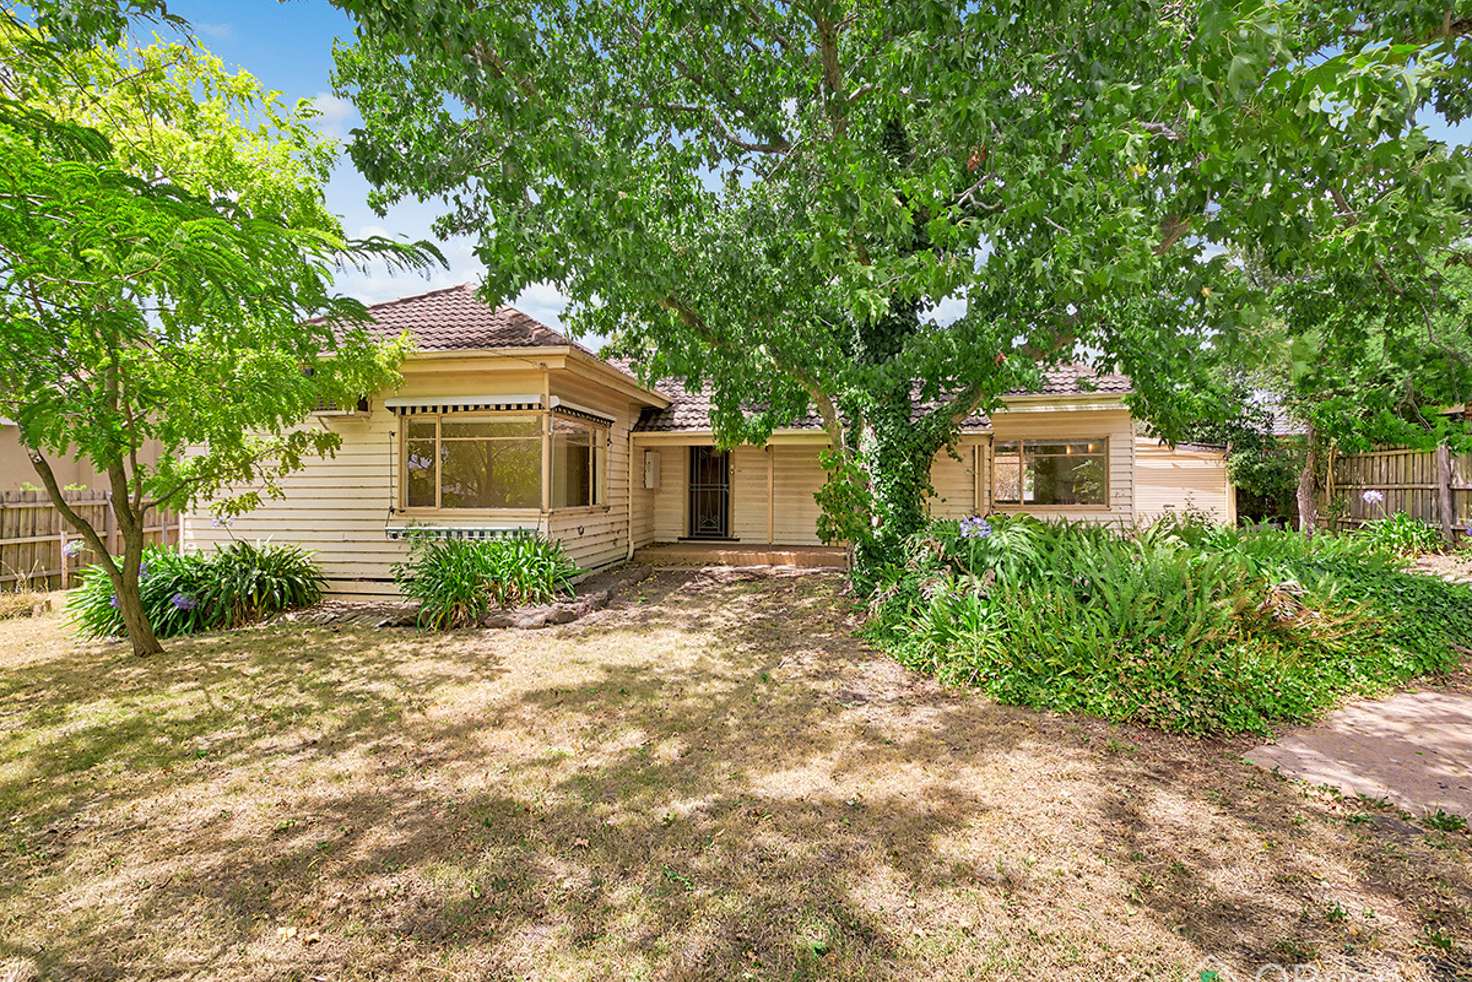 Main view of Homely house listing, 23 Elm Street, Bayswater VIC 3153